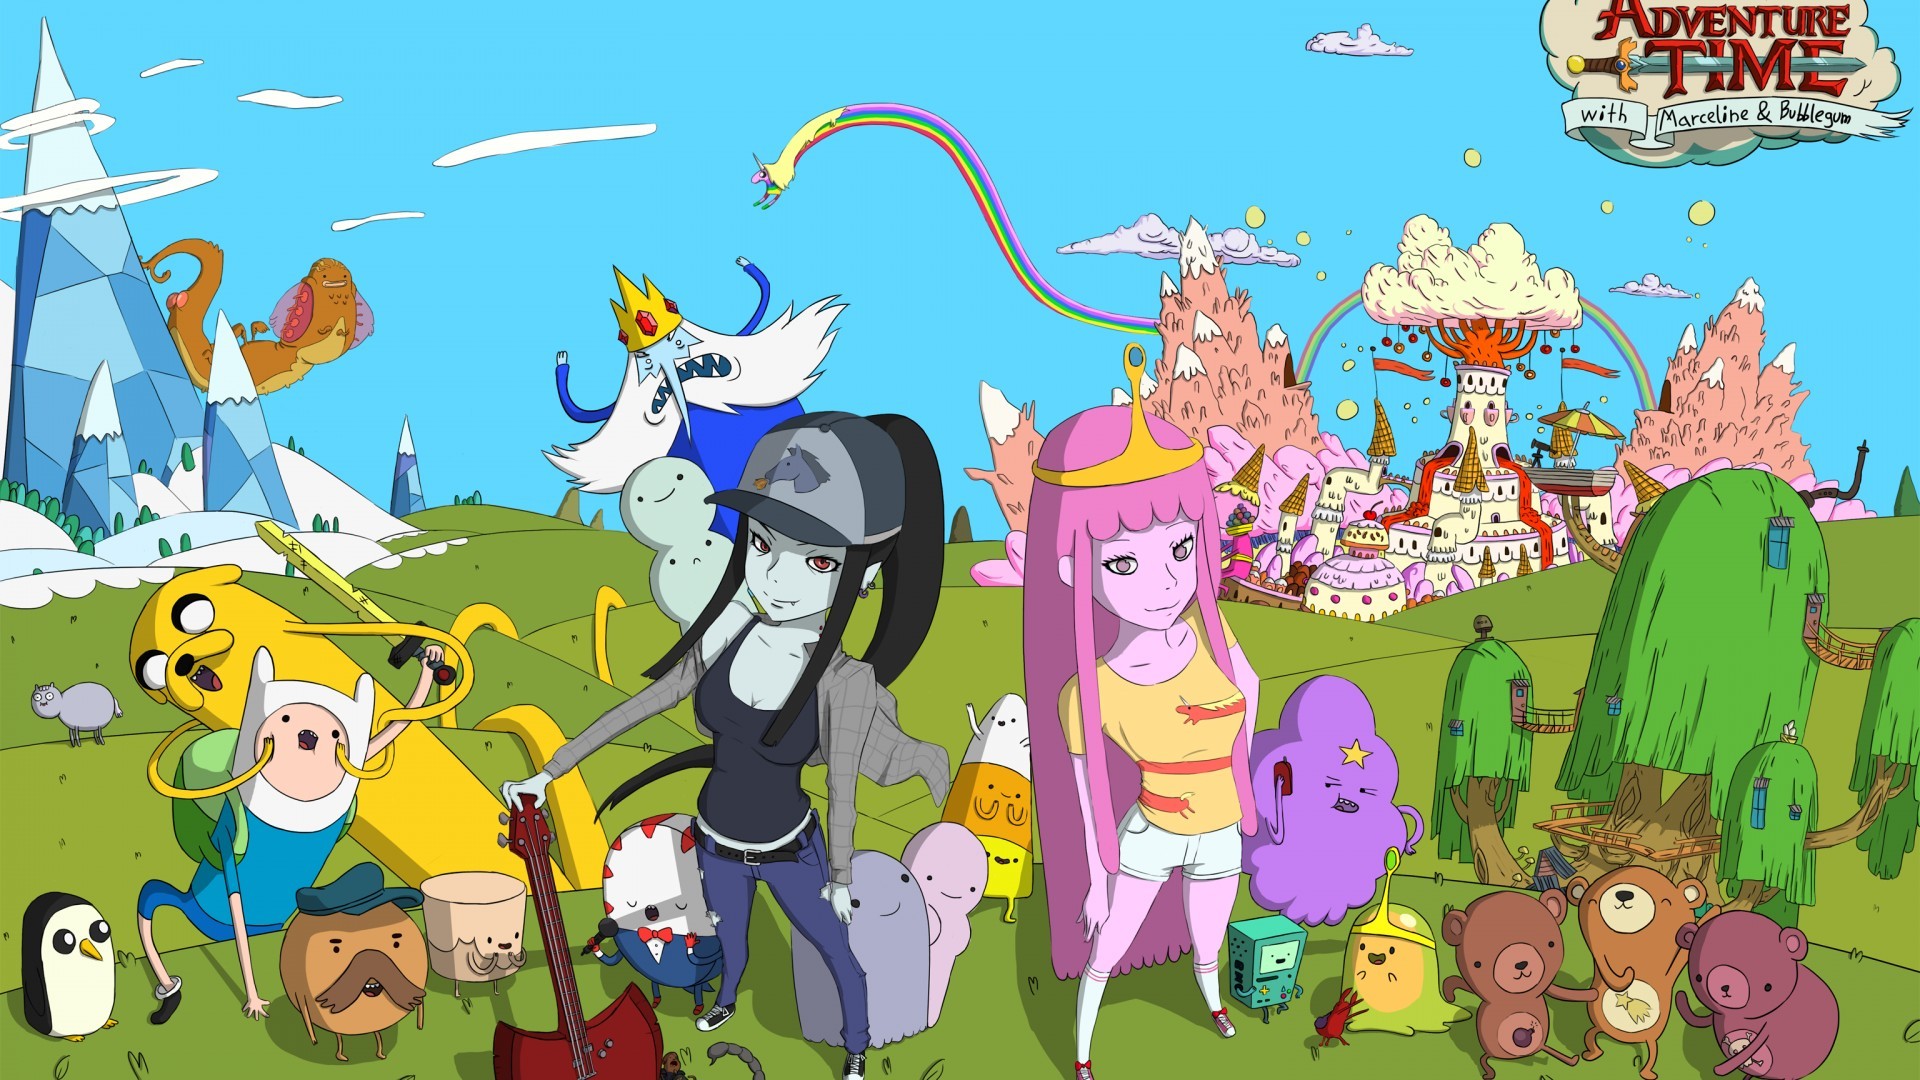 1920x1080, Adventure Time Backgrounds, Desktop Screen - Time With Finn And Jake - HD Wallpaper 